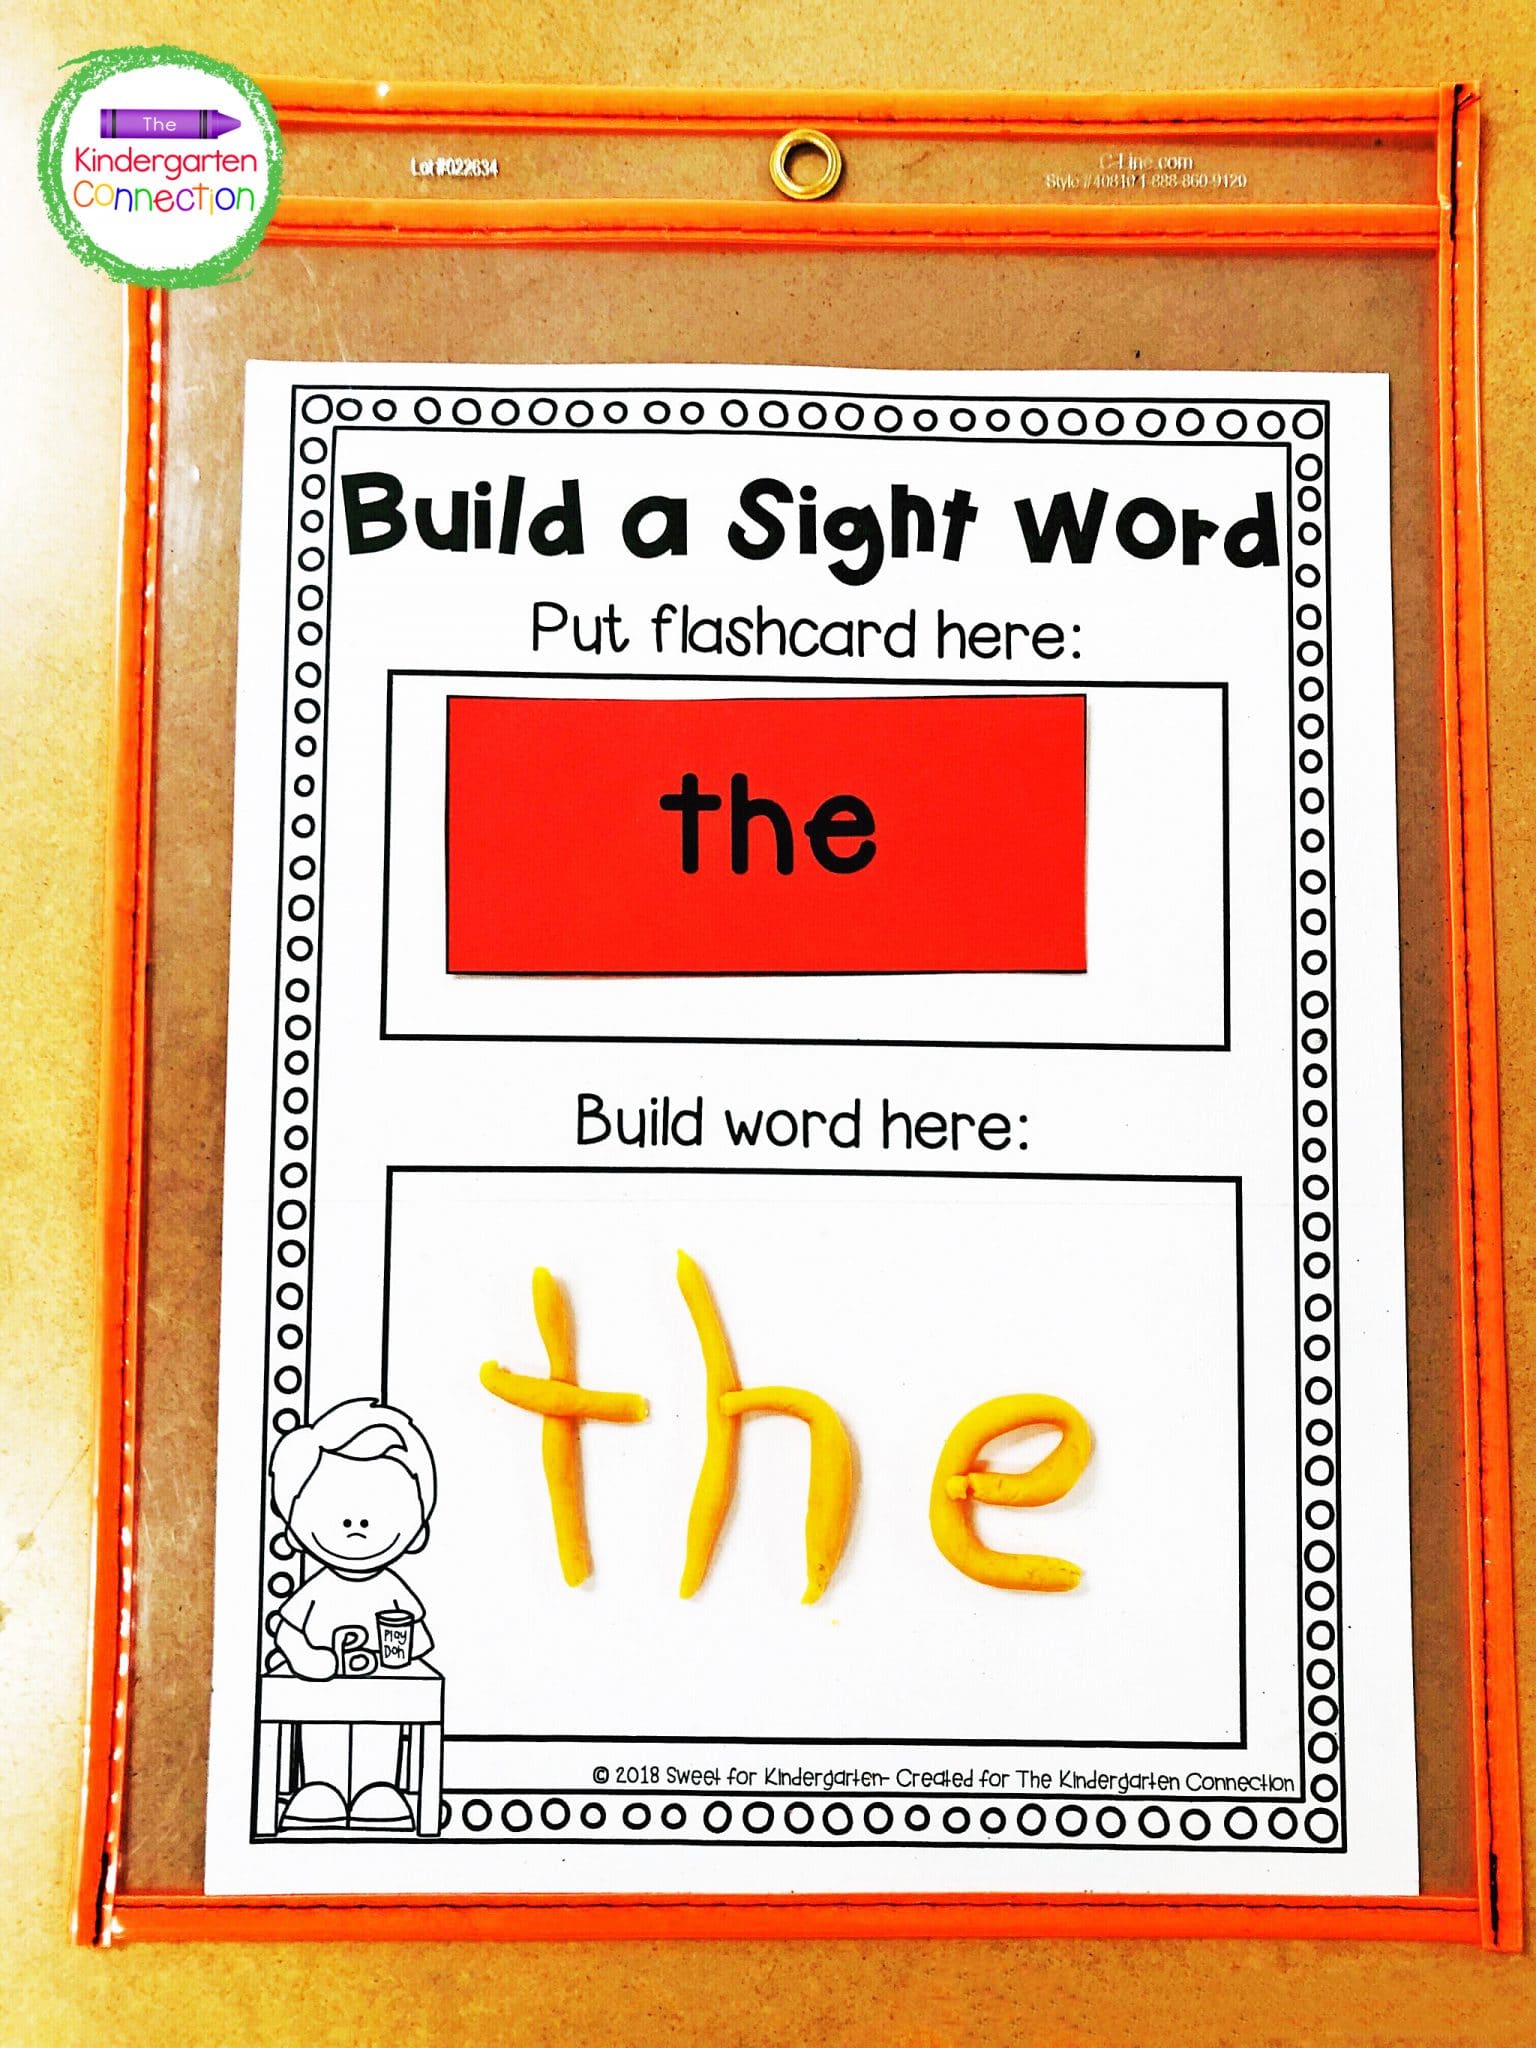 Students can use play dough to build sight words on the free play dough mat.